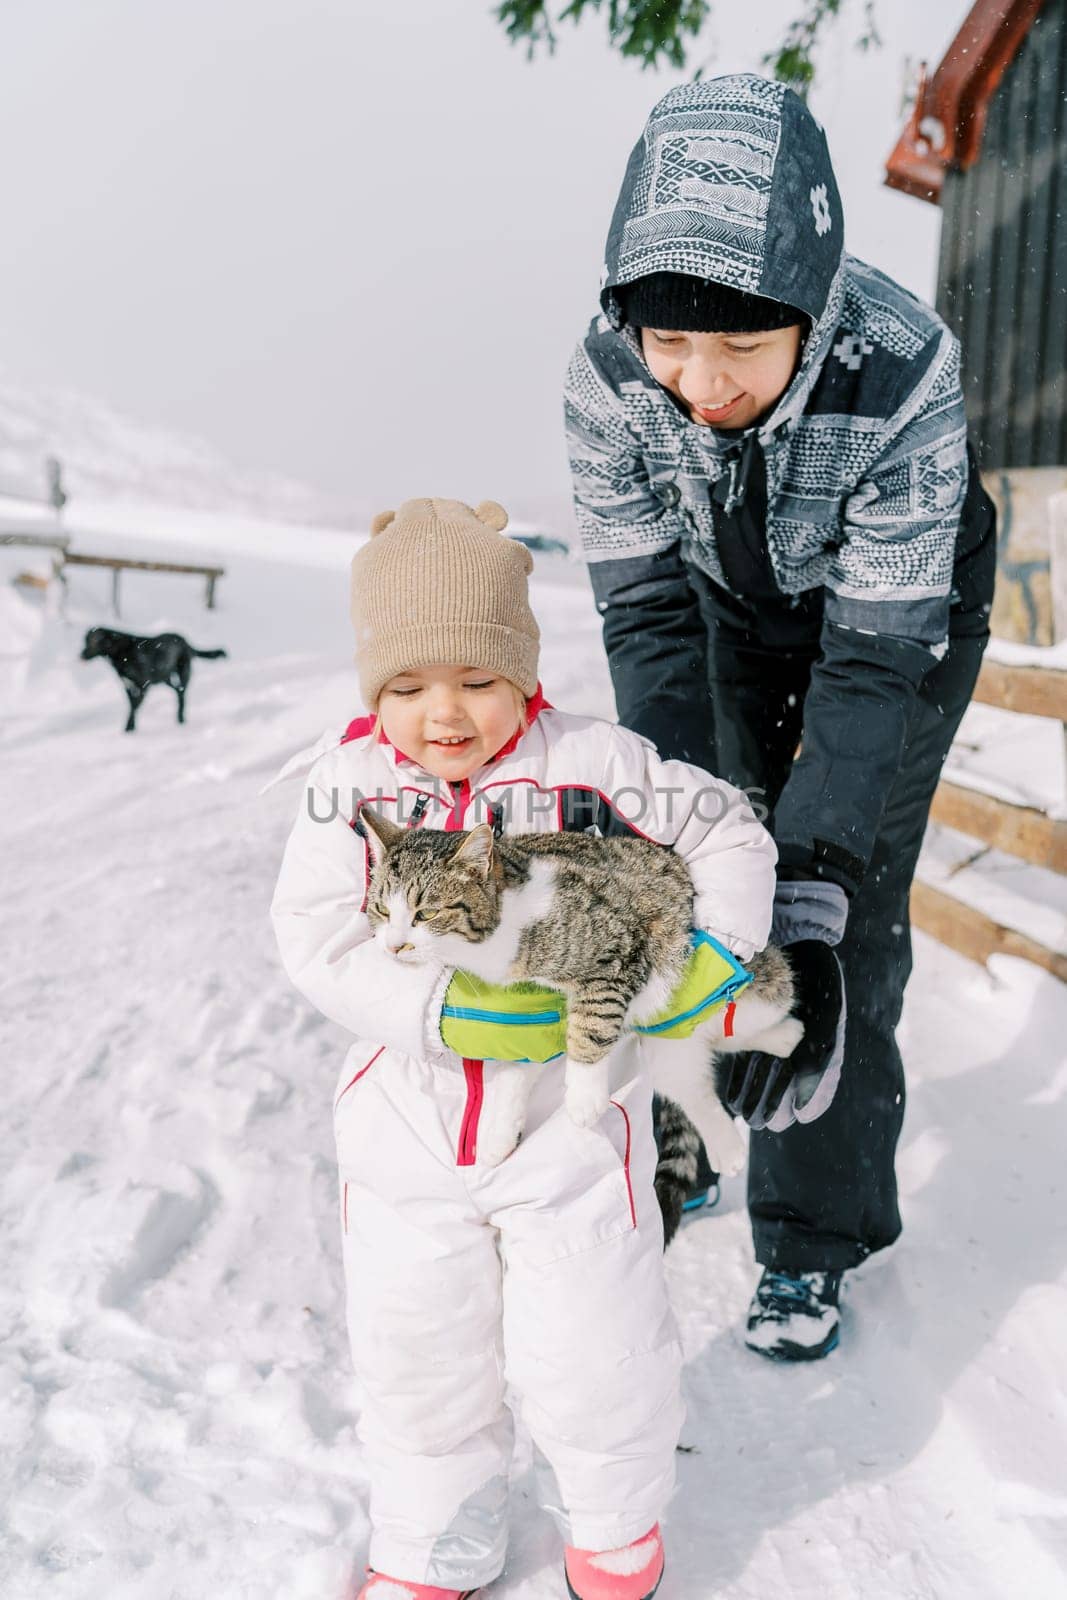 Smiling mother helps a little girl carry a tabby cat in her arms along a snowy road. High quality photo